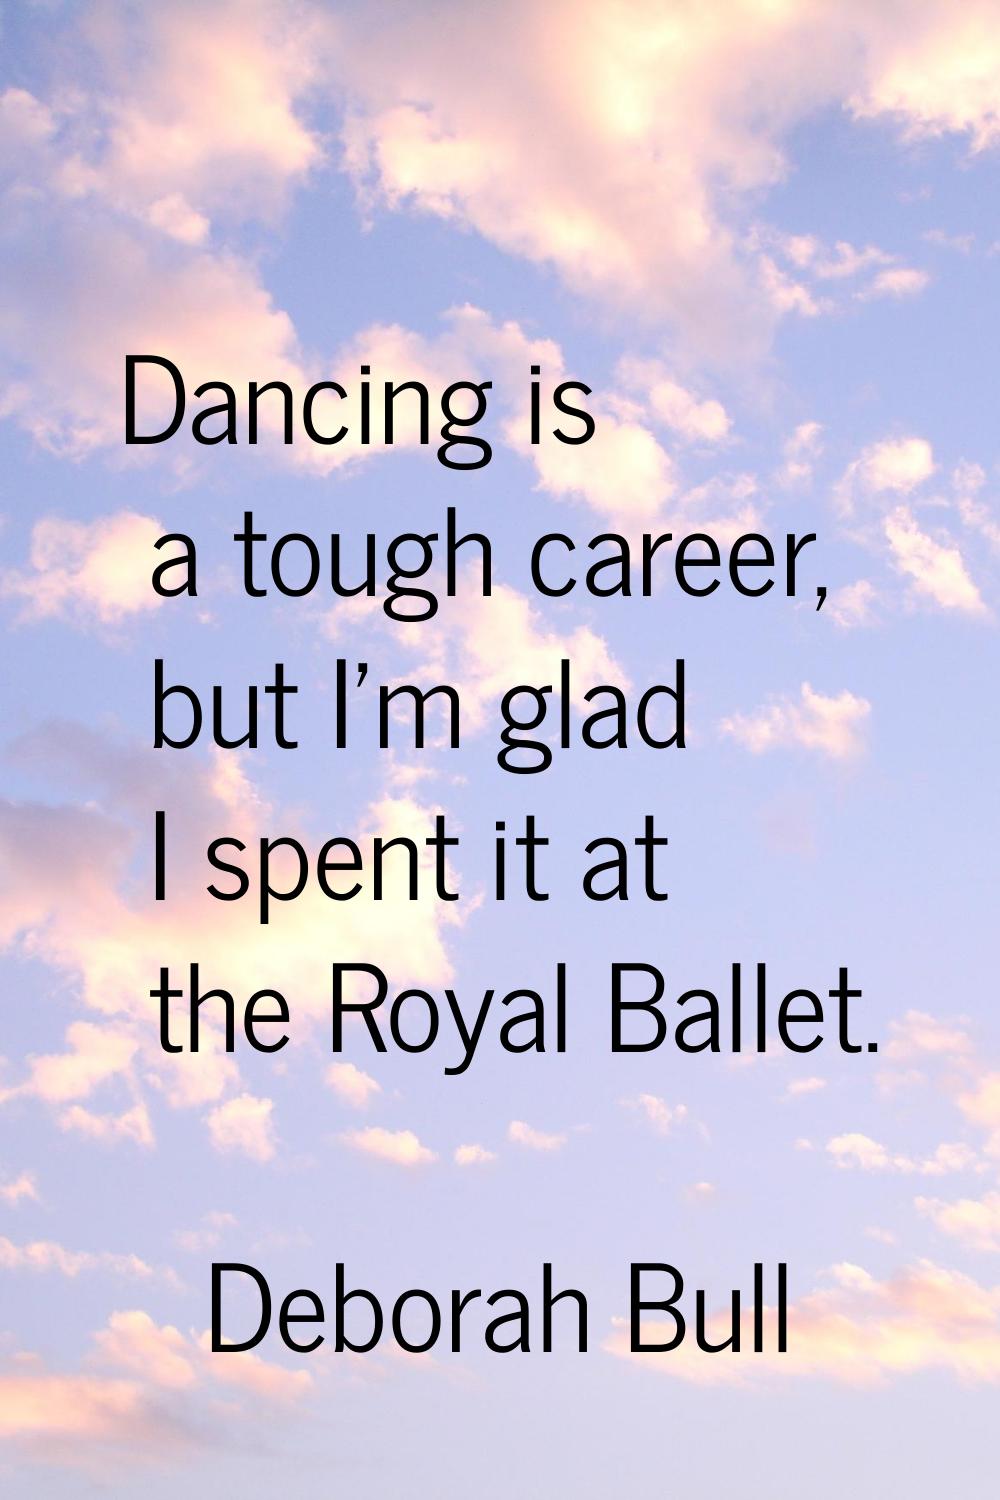 Dancing is a tough career, but I'm glad I spent it at the Royal Ballet.